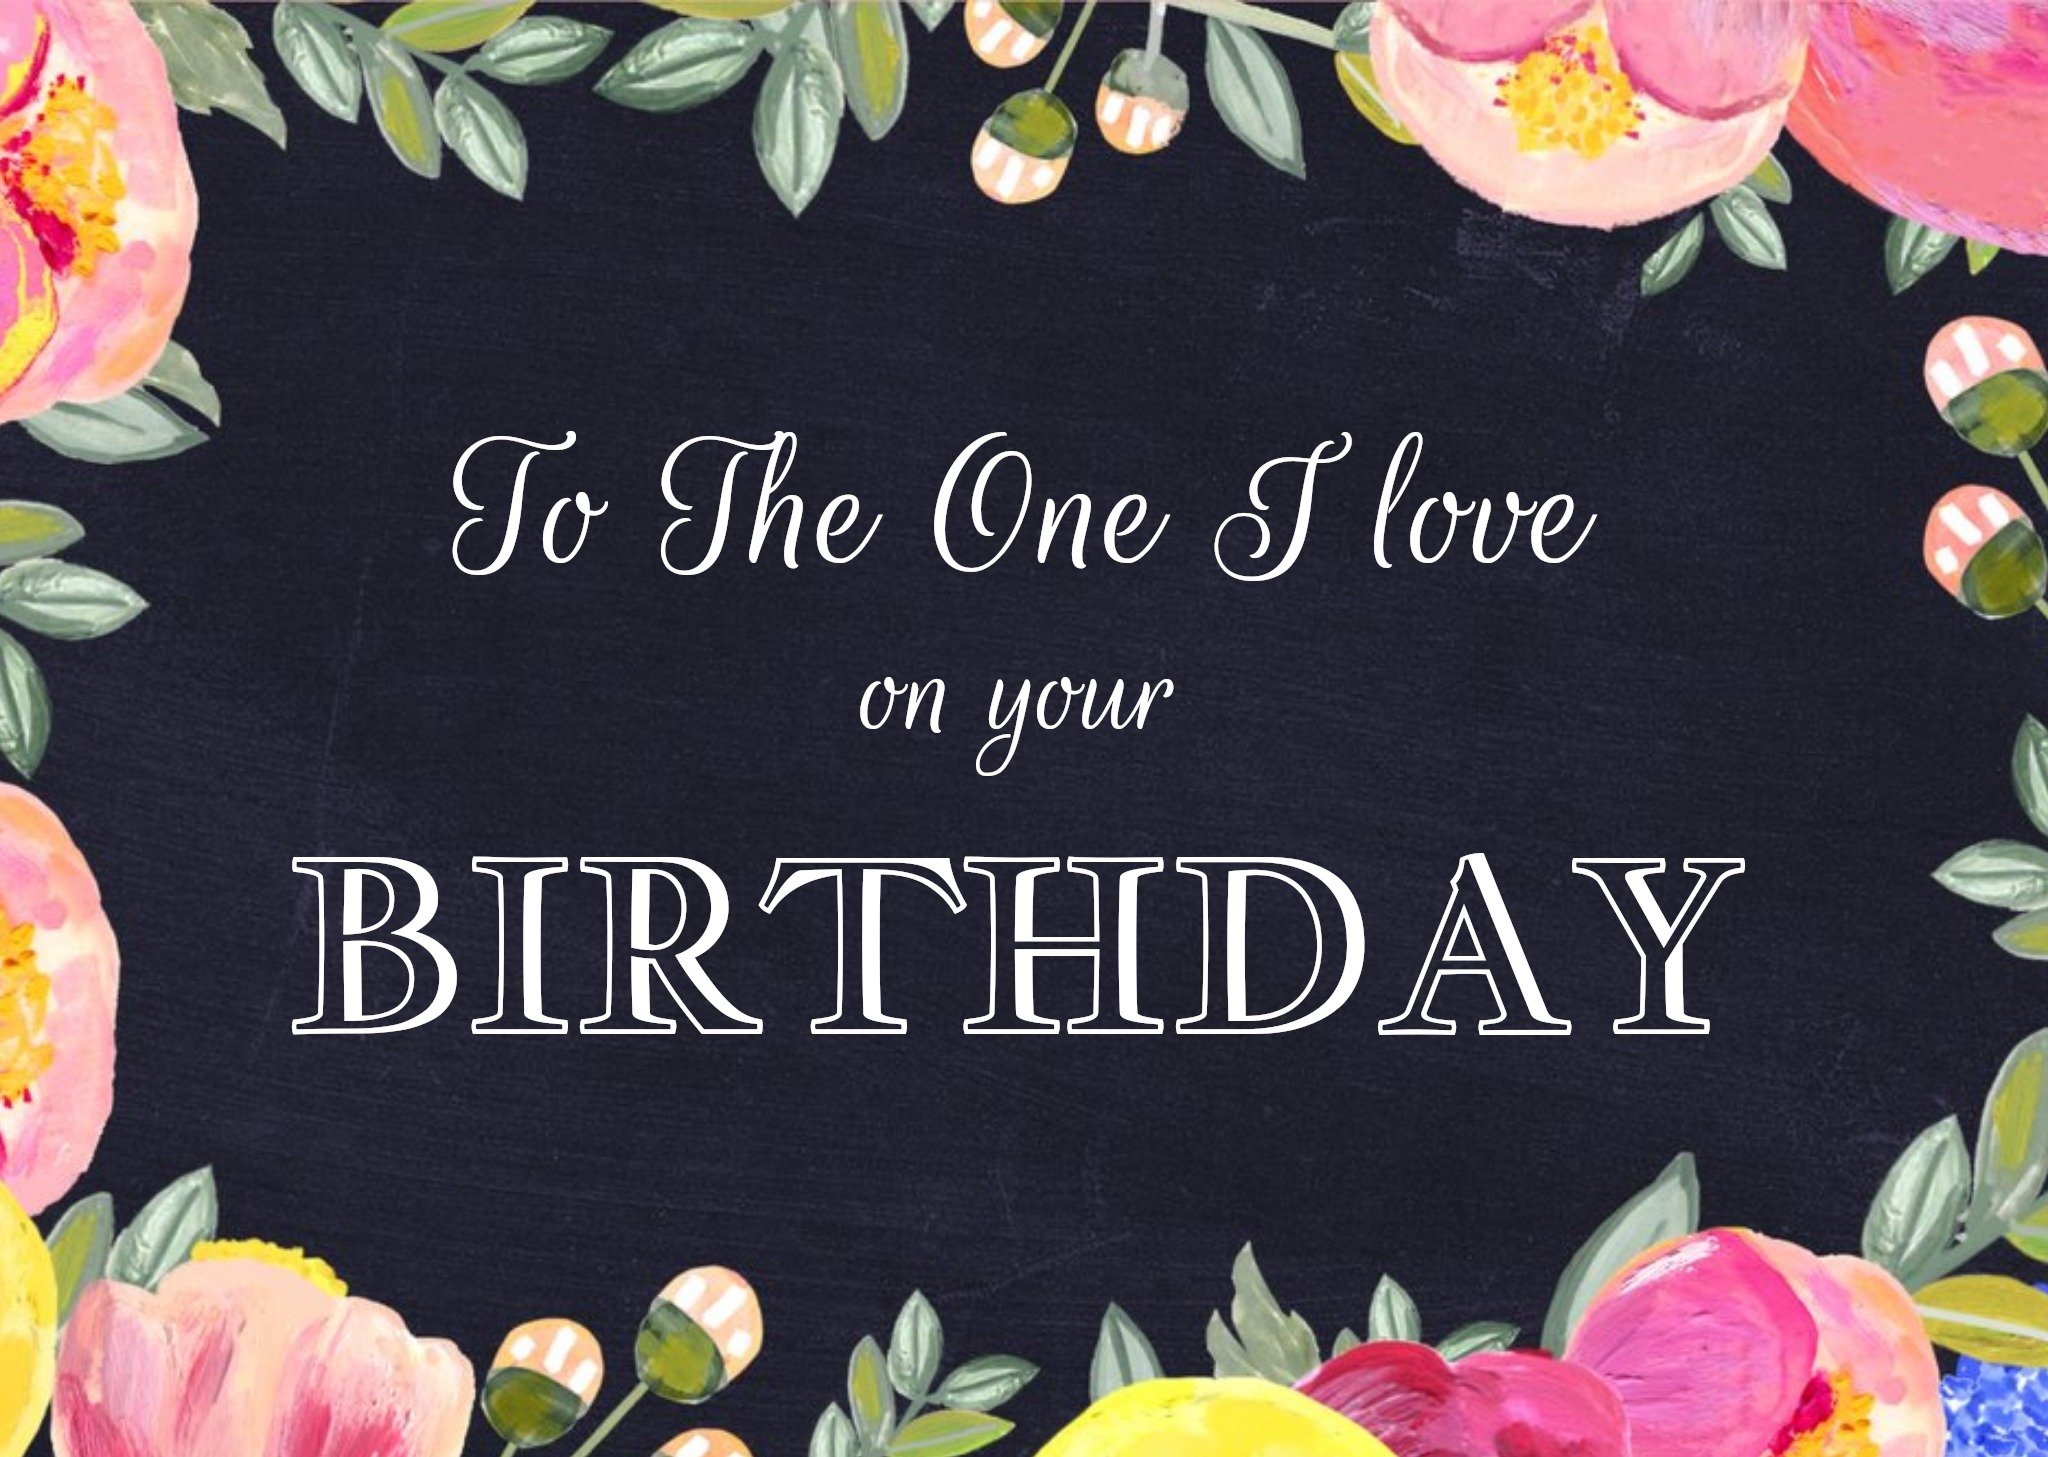 Moonpig To The One I Love On Your Birthday - Traditional Floral Birthday Card, Large